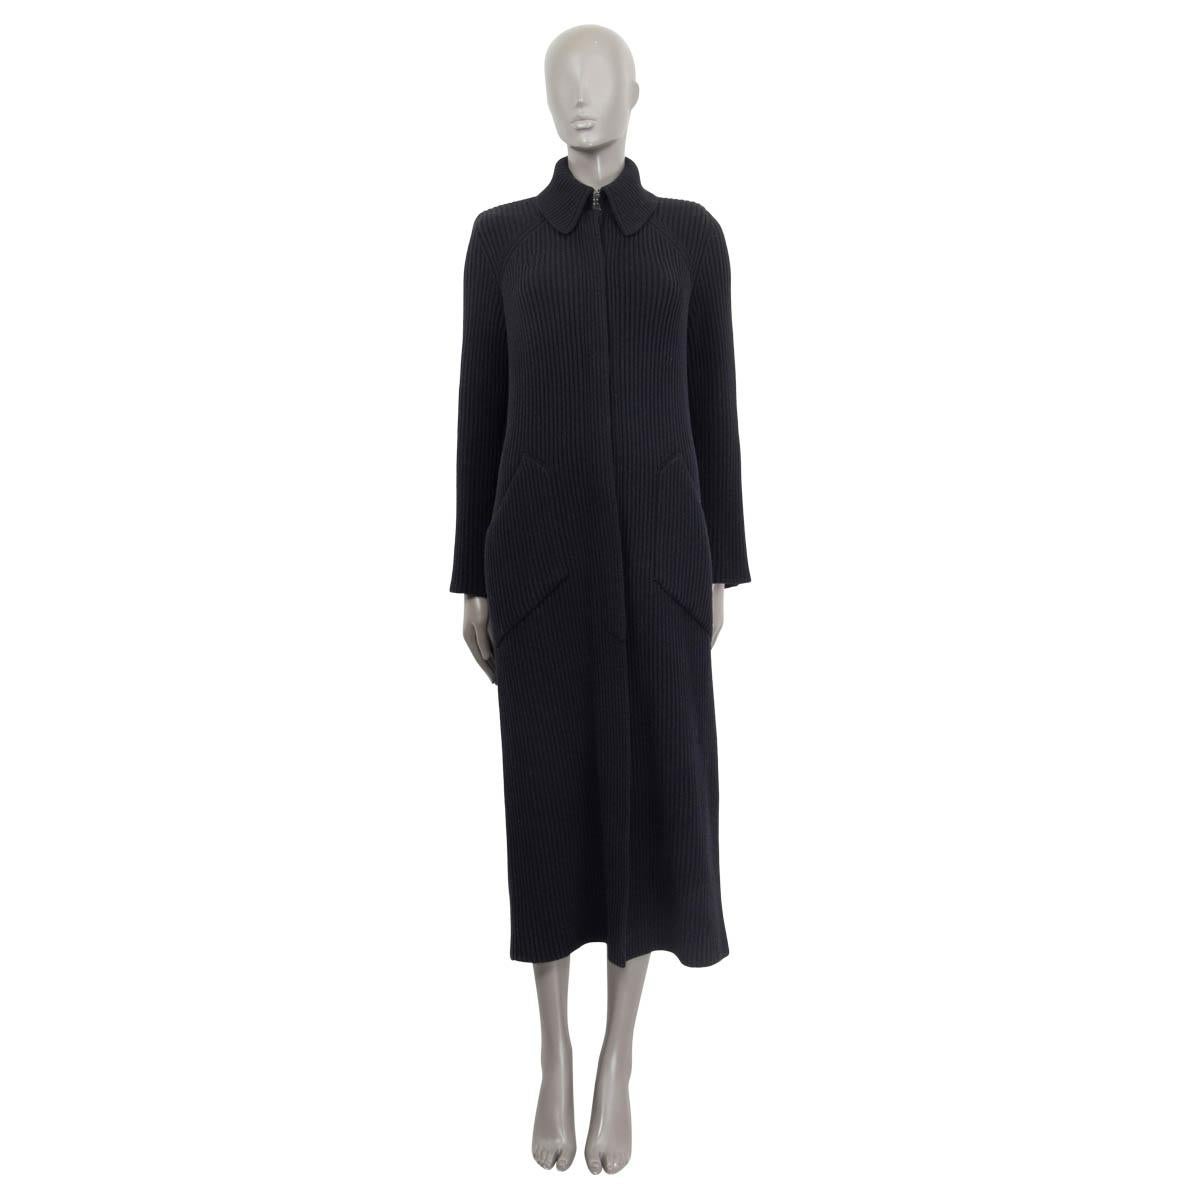 100% authentic Chanel Fall/Winter 2018 long knit coat in black wool (100%). Features buttoned cuffs and two slit pockets on the front. Has a slit on the back and padded shoulders. Opens with three hooks at the collar and eight concealed 'CC' buttons